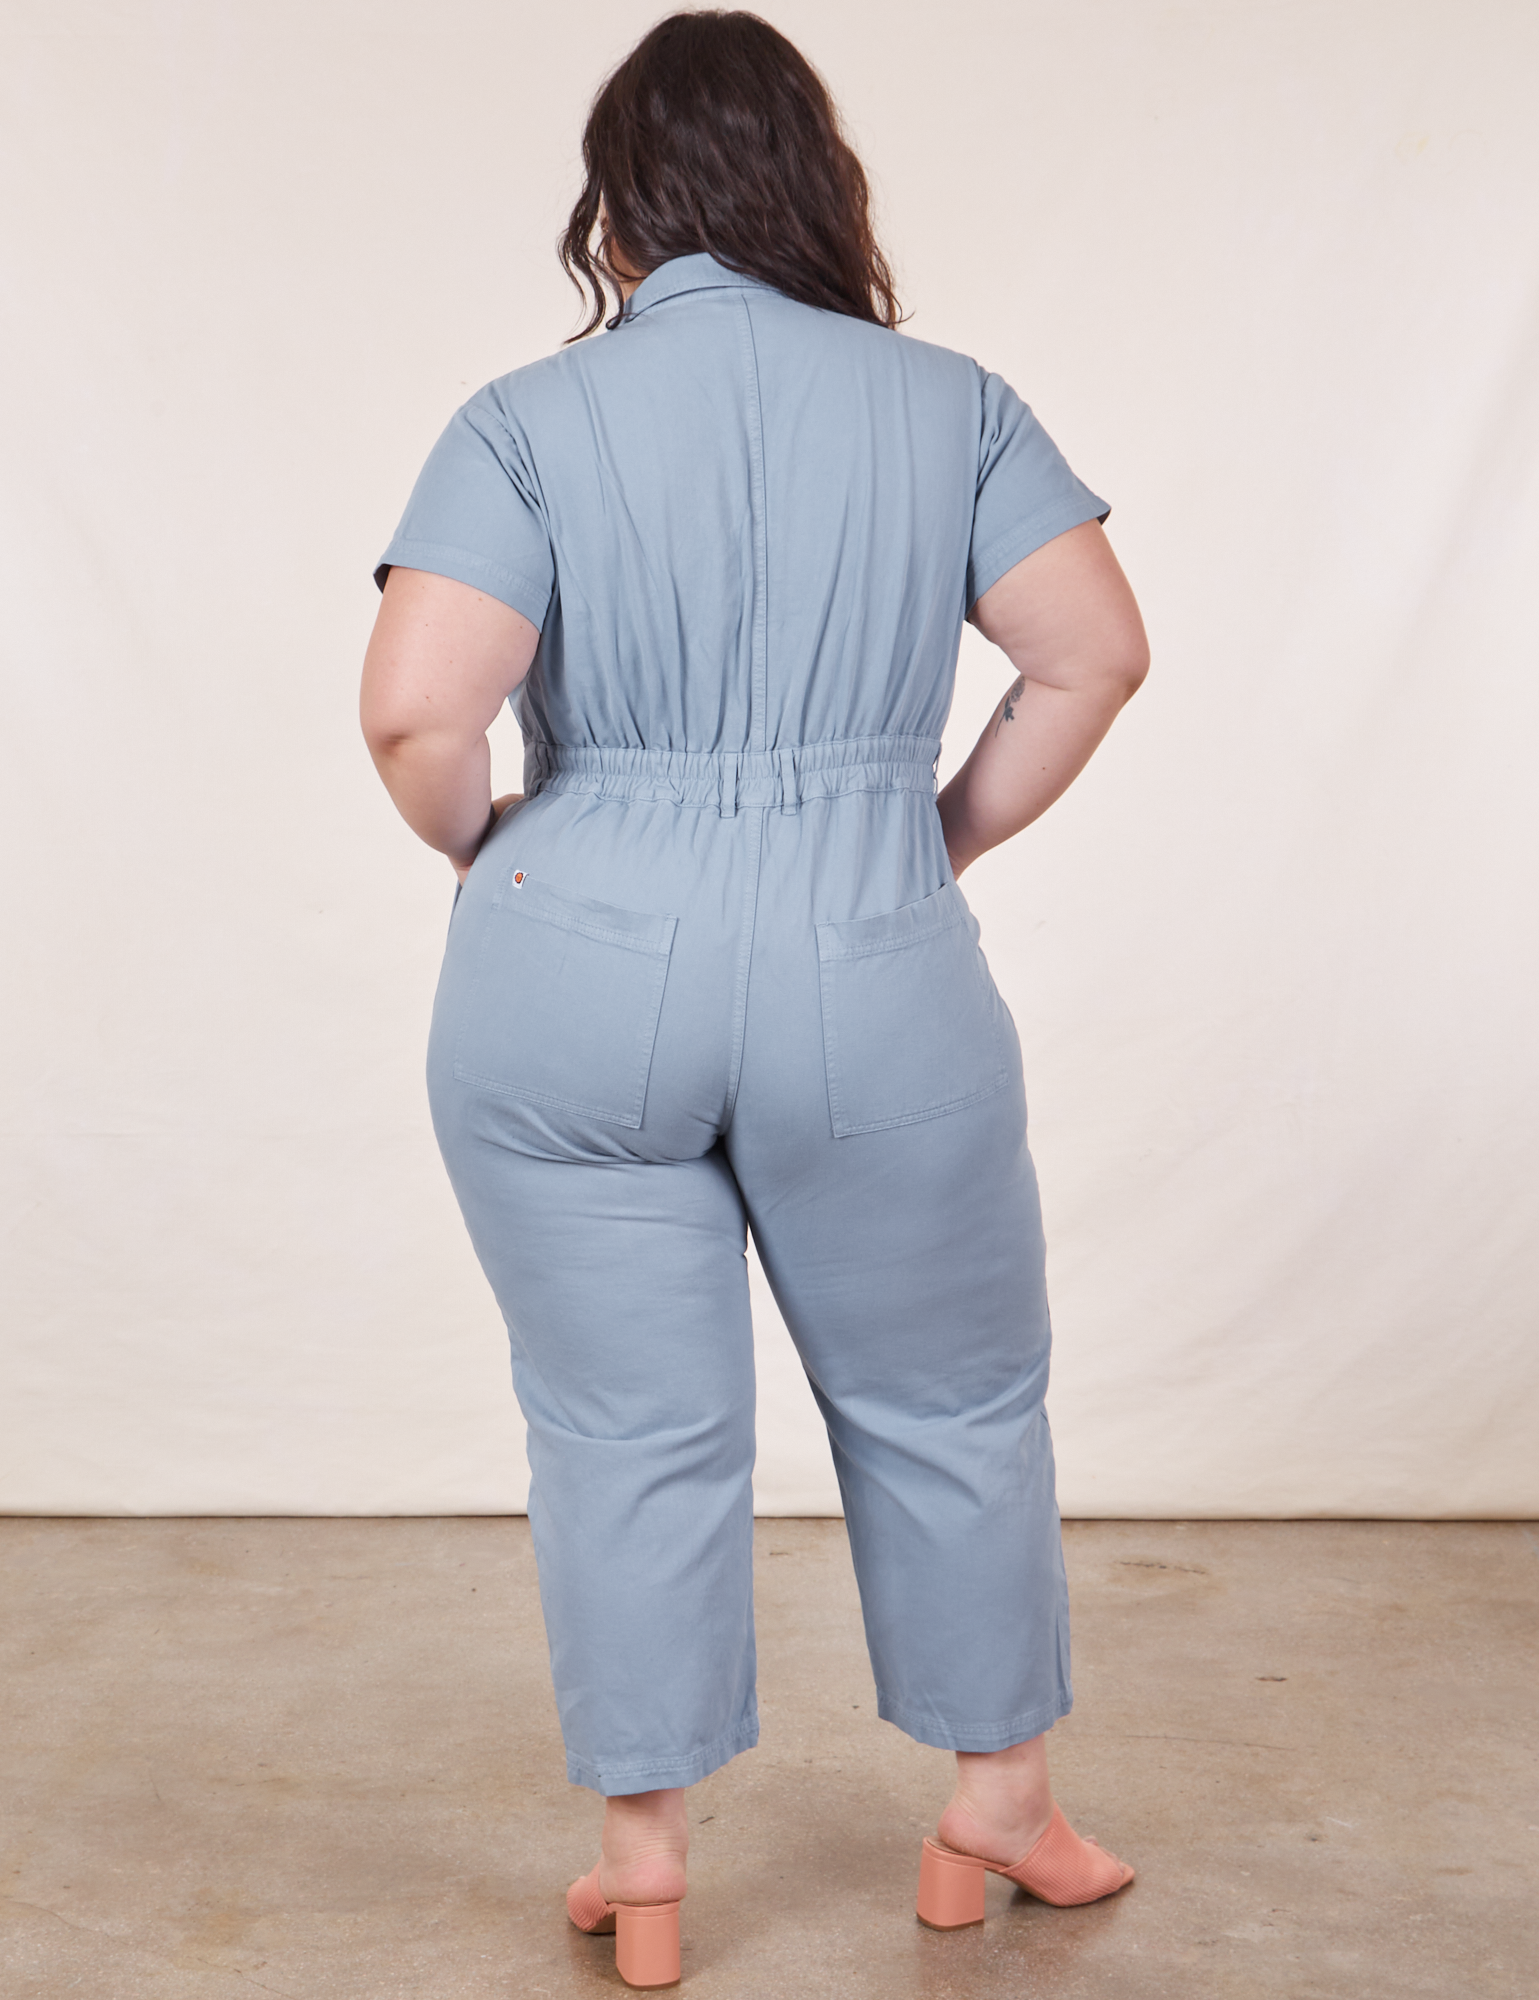 Back view of Petite Short Sleeve Jumpsuit in Periwinkle on Ashley